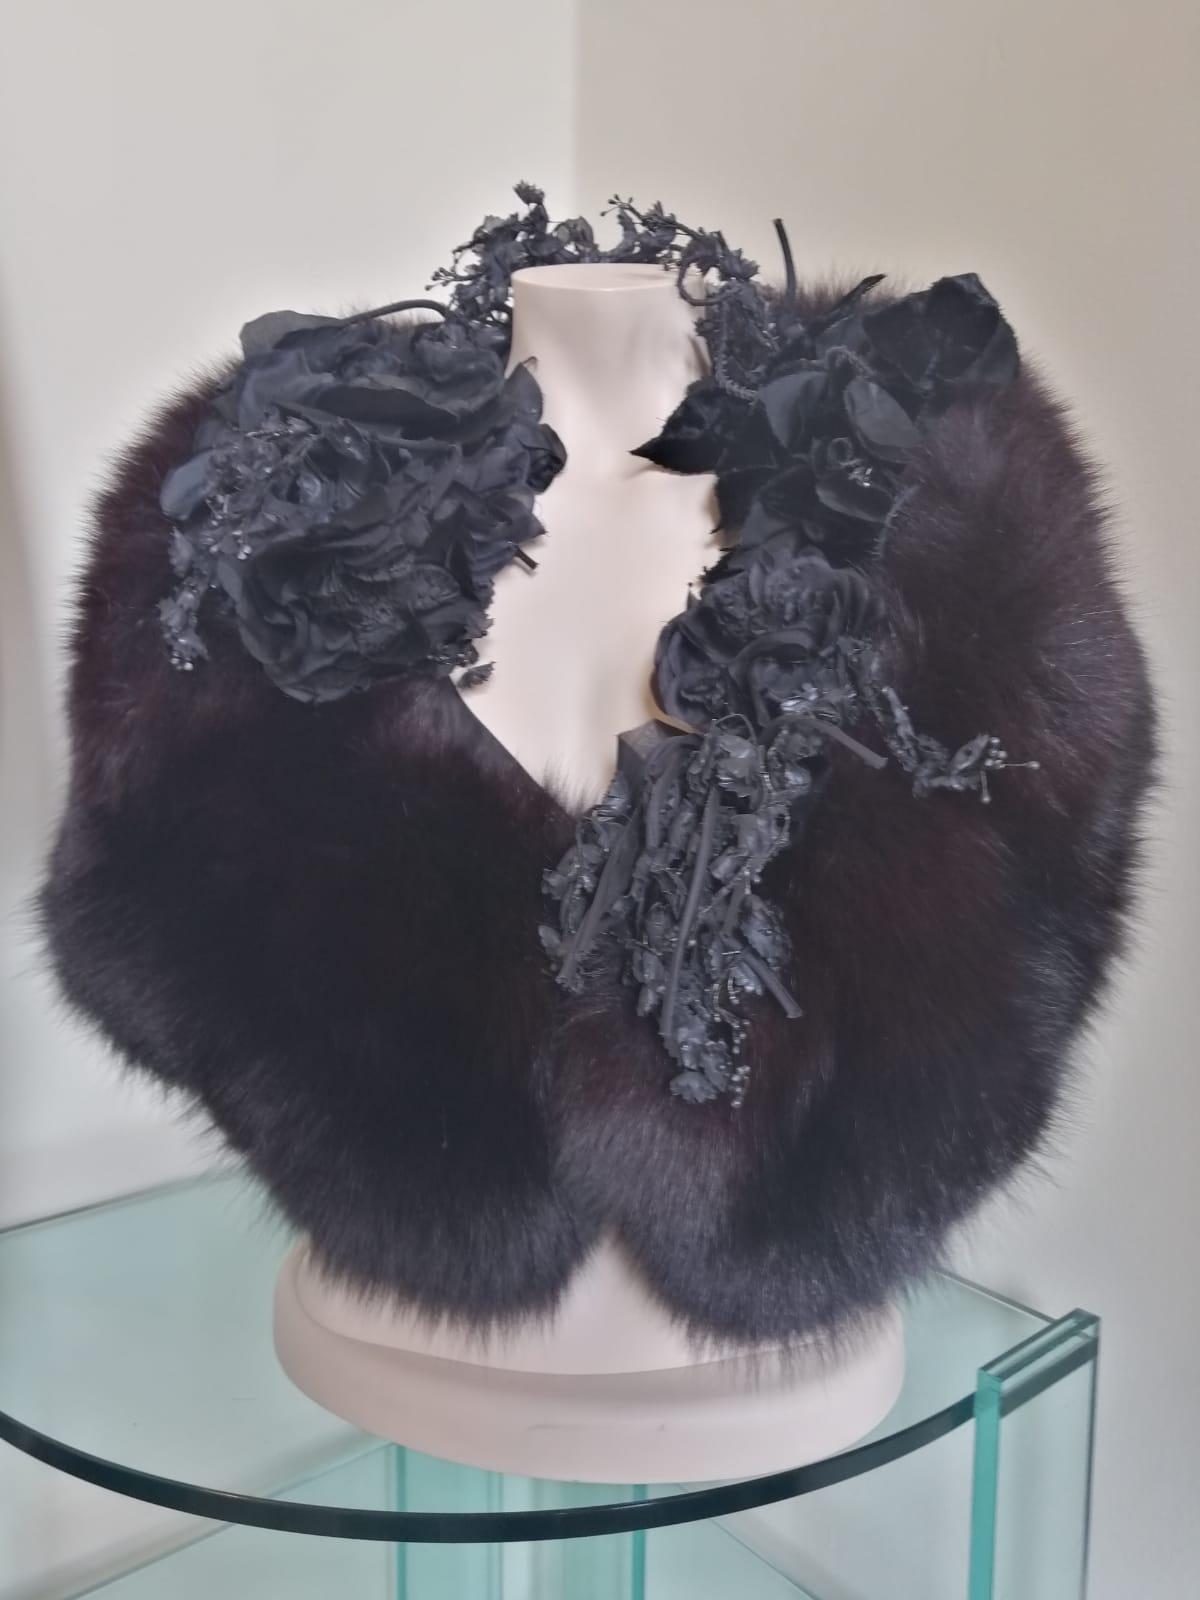 Stunning, historic and unfindable piece by Christian Dior, designed by Gianfranco Ferré
Haute Couture piece, 1989 Paris fall winter runway 
Belonging to Gianfranco Ferré very first collection with Dior
Real fox fur
Black color
Stunning textile